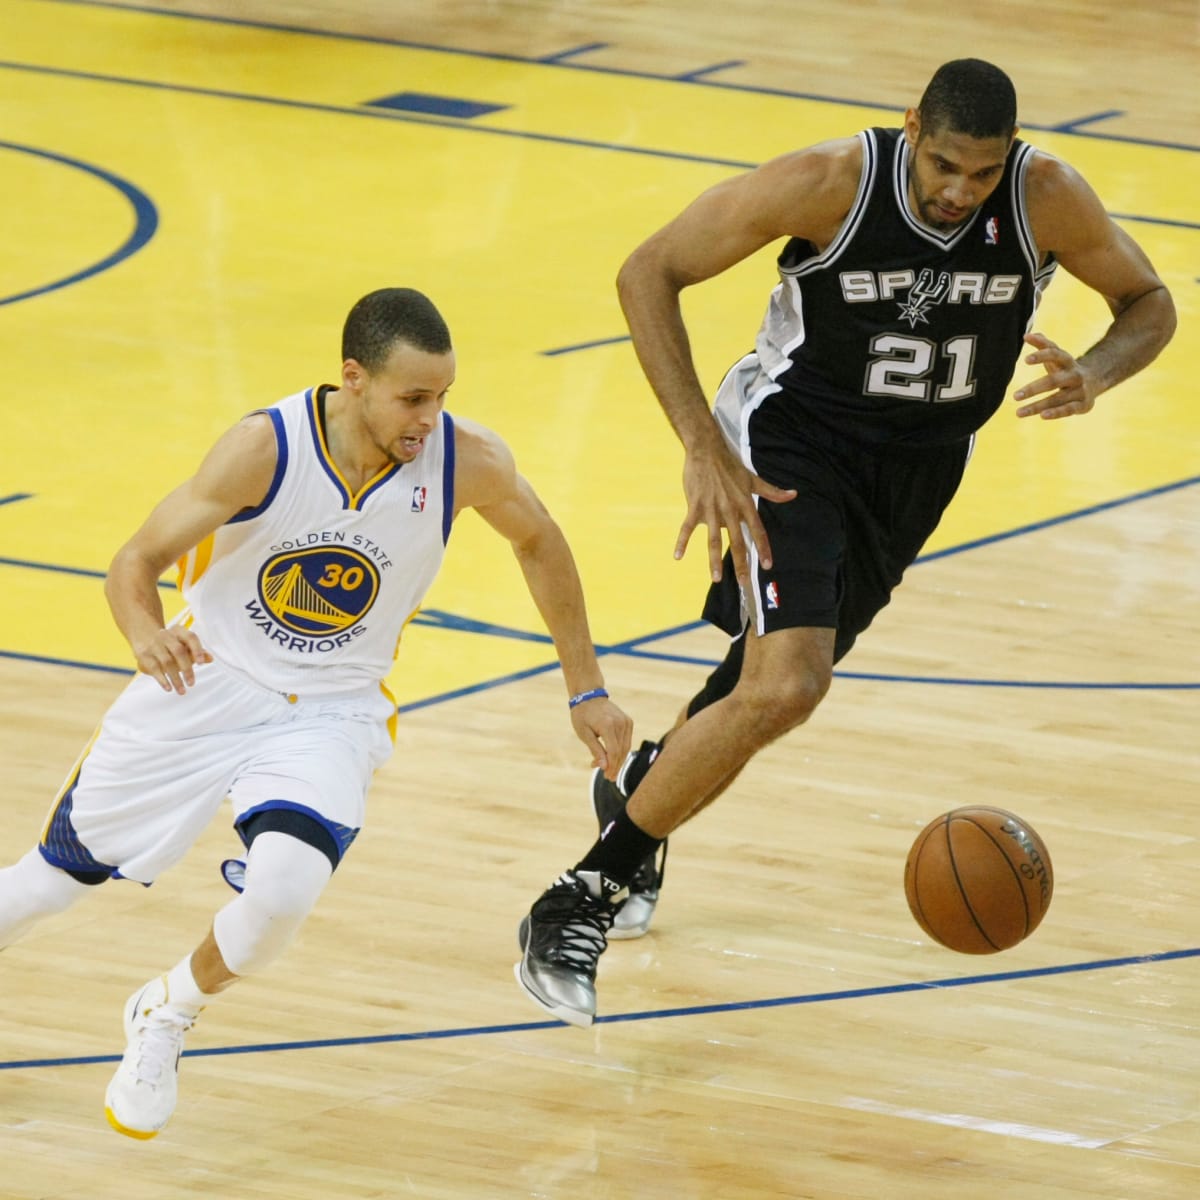 Steve Kerr Compares Stephen Curry To Tim Duncan After 4th Championship Win:  "Steph Is Why This Run Has Happened" - Fadeaway World